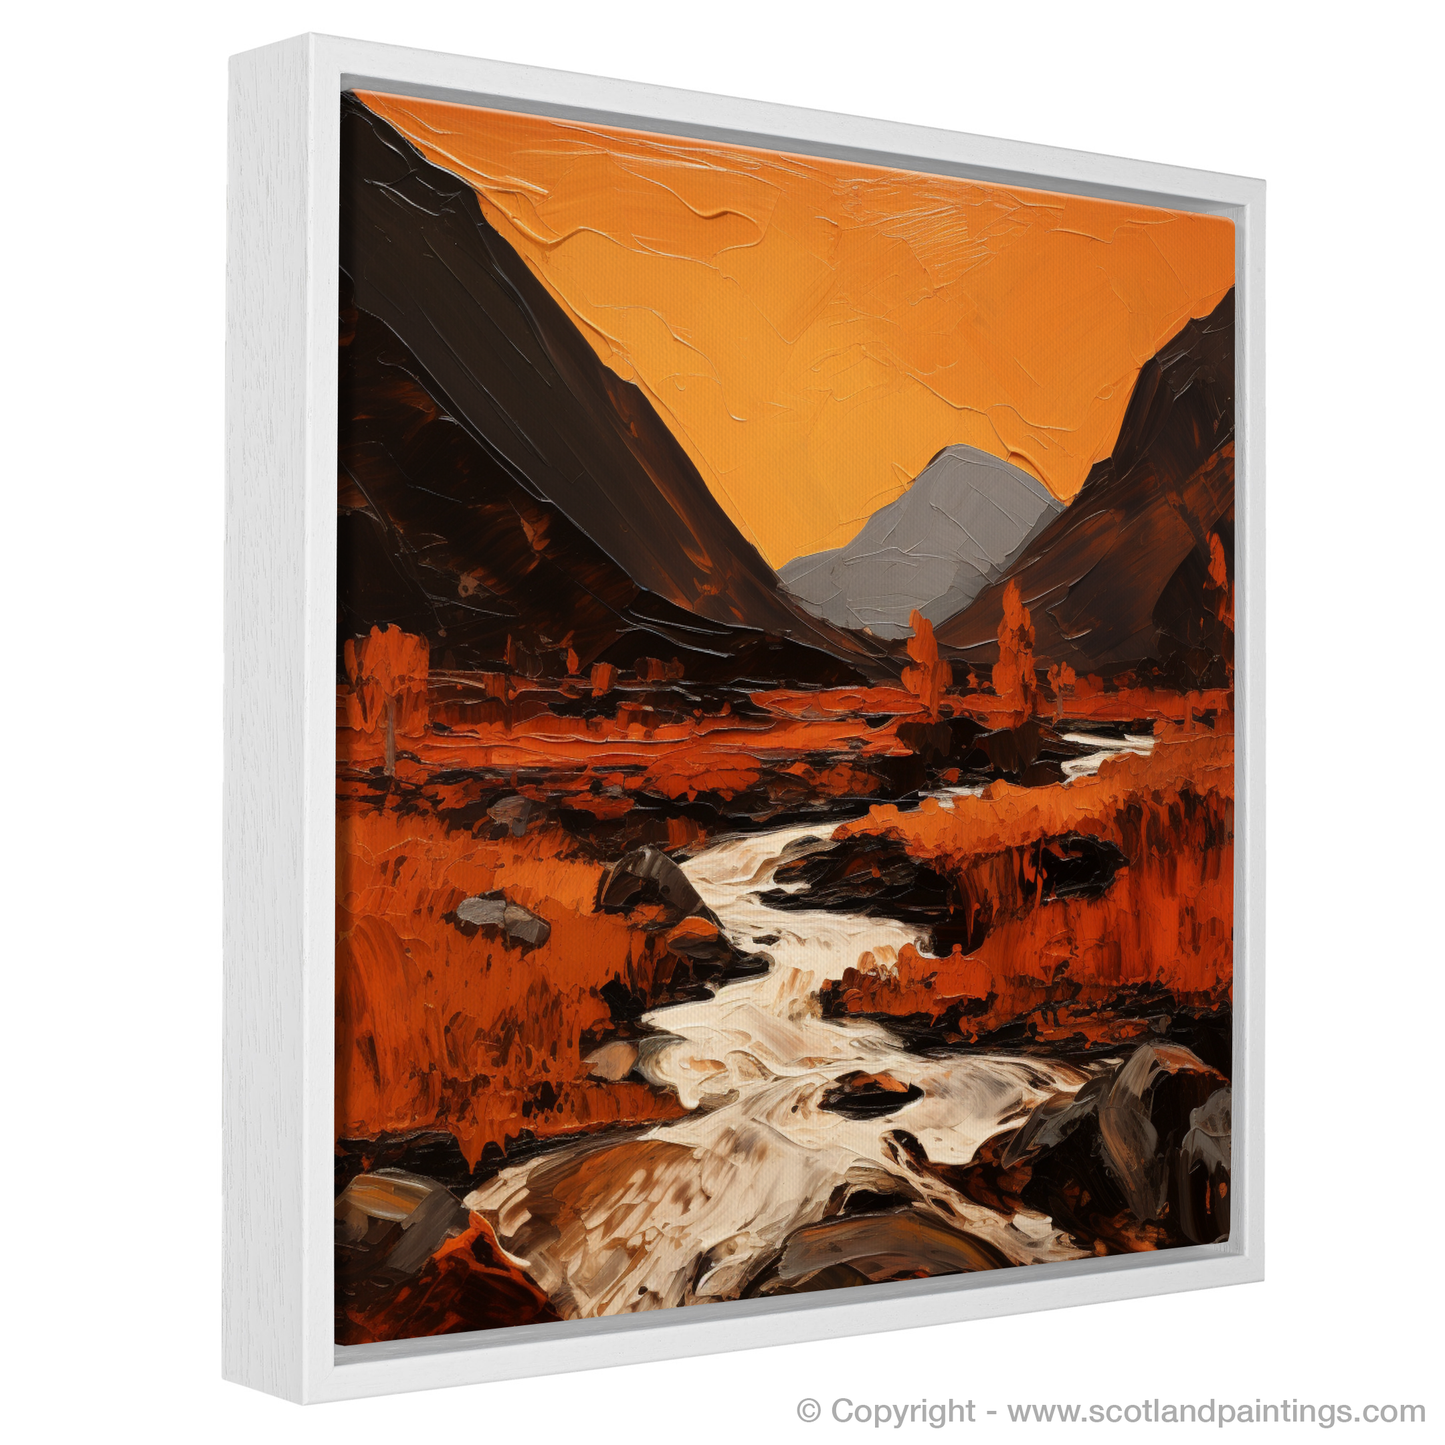 Painting and Art Print of Autumn hues in Glencoe entitled "Autumn Drama in Glencoe: An Expressionist Journey Through the Highlands".